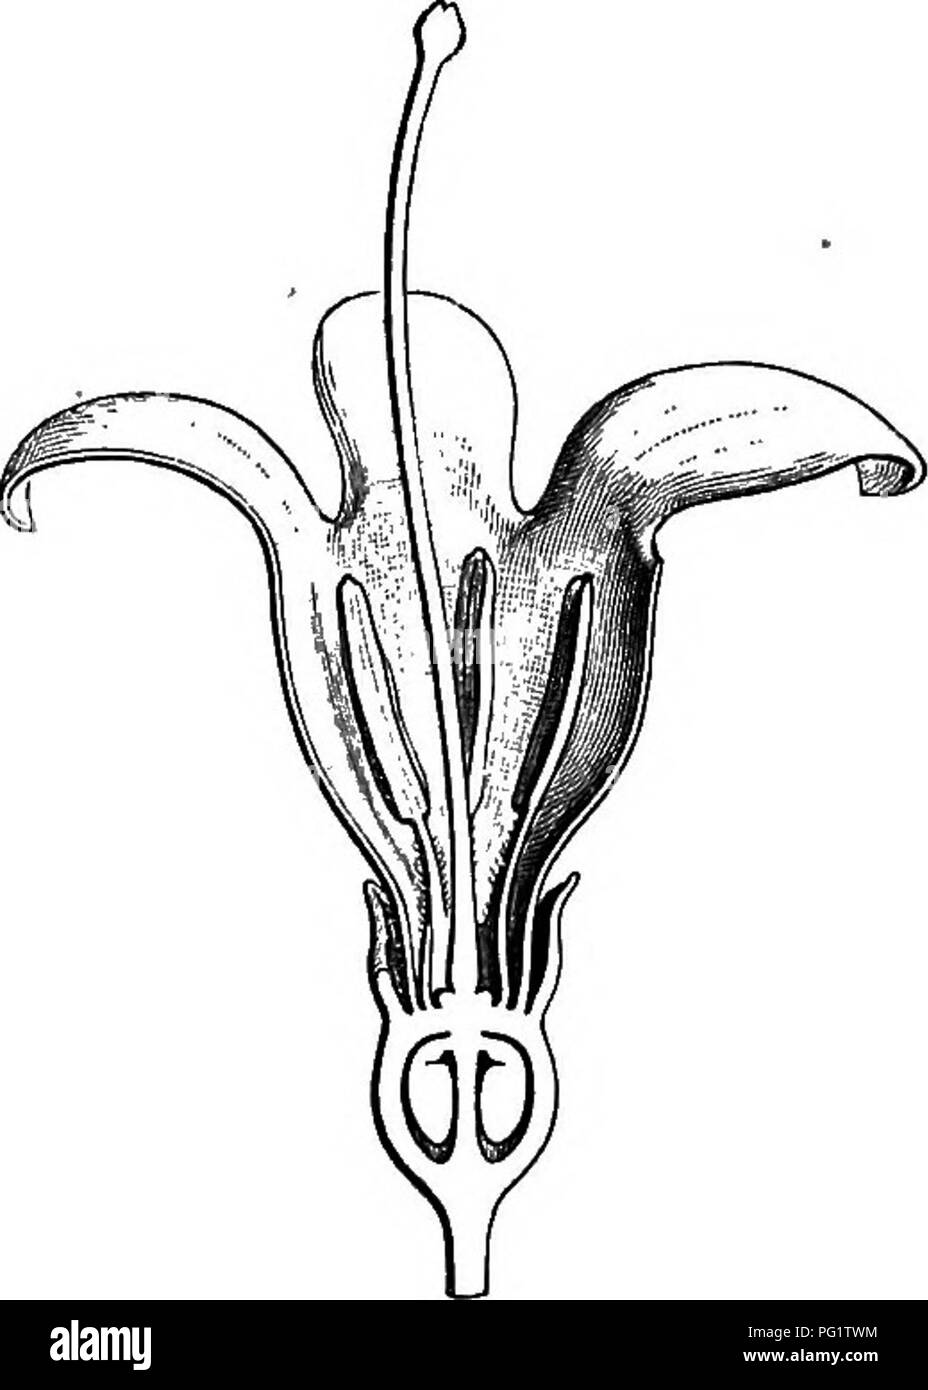 . The natural history of plants. Botany. Fig. 283. Flower. Fig. 282. Bud (?). Fig. 285. Long. sect, of flower. a short dentate calyx and a funnel- or bell-shaped corolla, the limb of which is divided into five lobes ^ marginally imbricate in the bud. The stamens, epigynous, are scarcely united with the base of the ' p. Br. Jam. 174.—L. Gen. n. 231.—GriEBTN. Fr.i. 125, t.26.—Lamk. III. t. 160.—Rich. JJaJ. 106.—DC. Prodr. iv. 482 (§ i.).-Spach, Suit, d £uffon, Yiji. 437.—Ekdl. Gm. n. 3167.—B.H. Gen. ii. 106, n. 211.—H. Bs. Bull. See. Linn. Par. 182.—?Marffaris DC. Prodr. iv. i83.Desolcea Sess.  Stock Photo